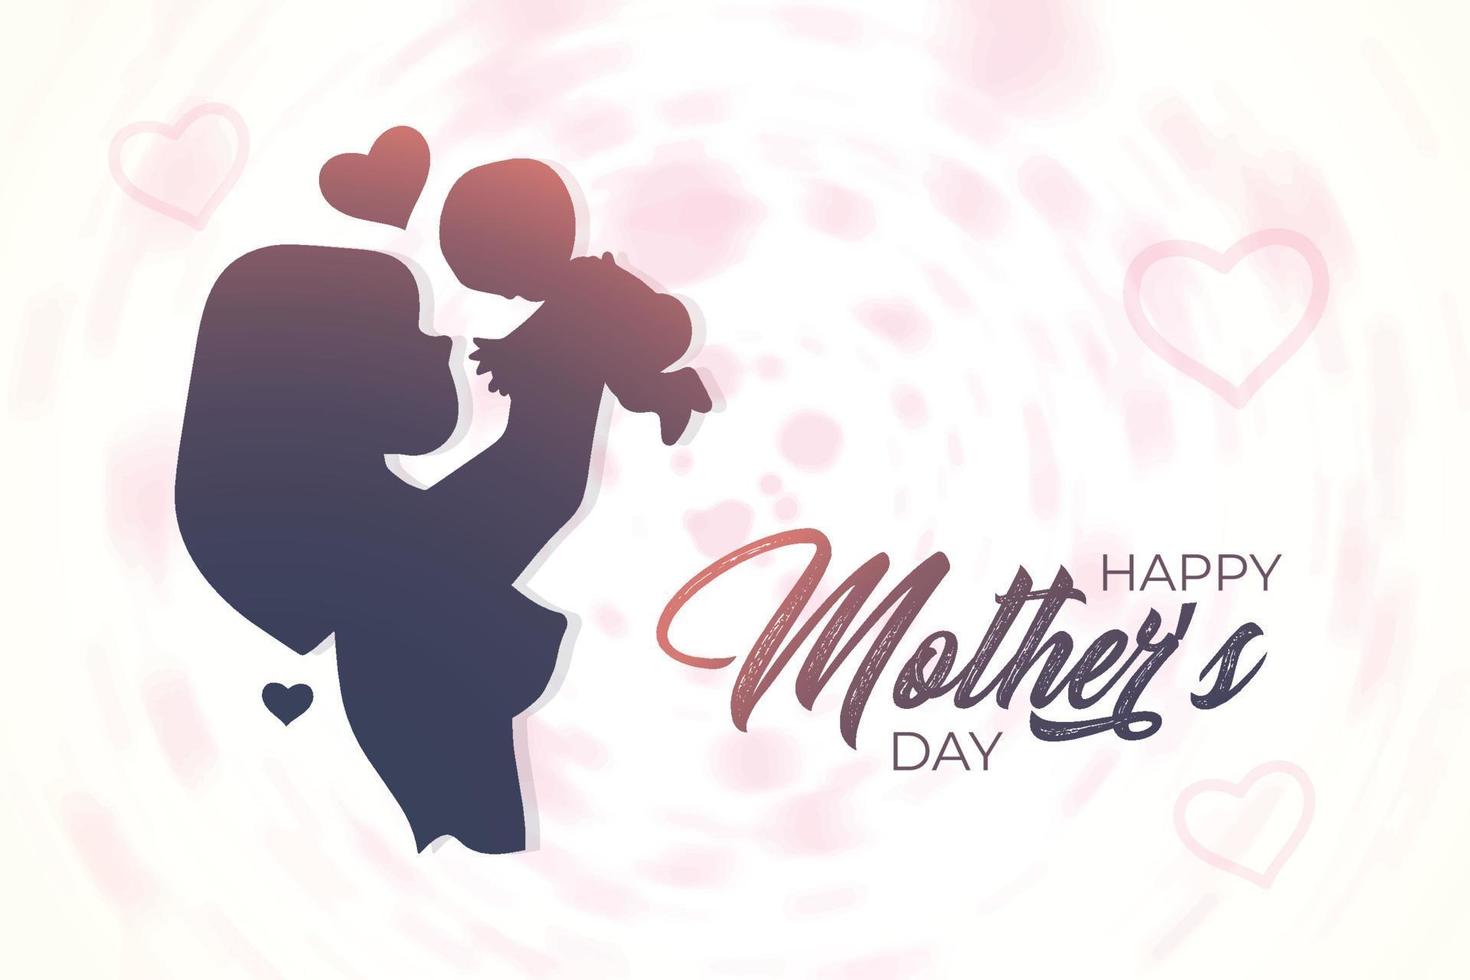 Mother and baby greeting illustration design for happy mothers day vector